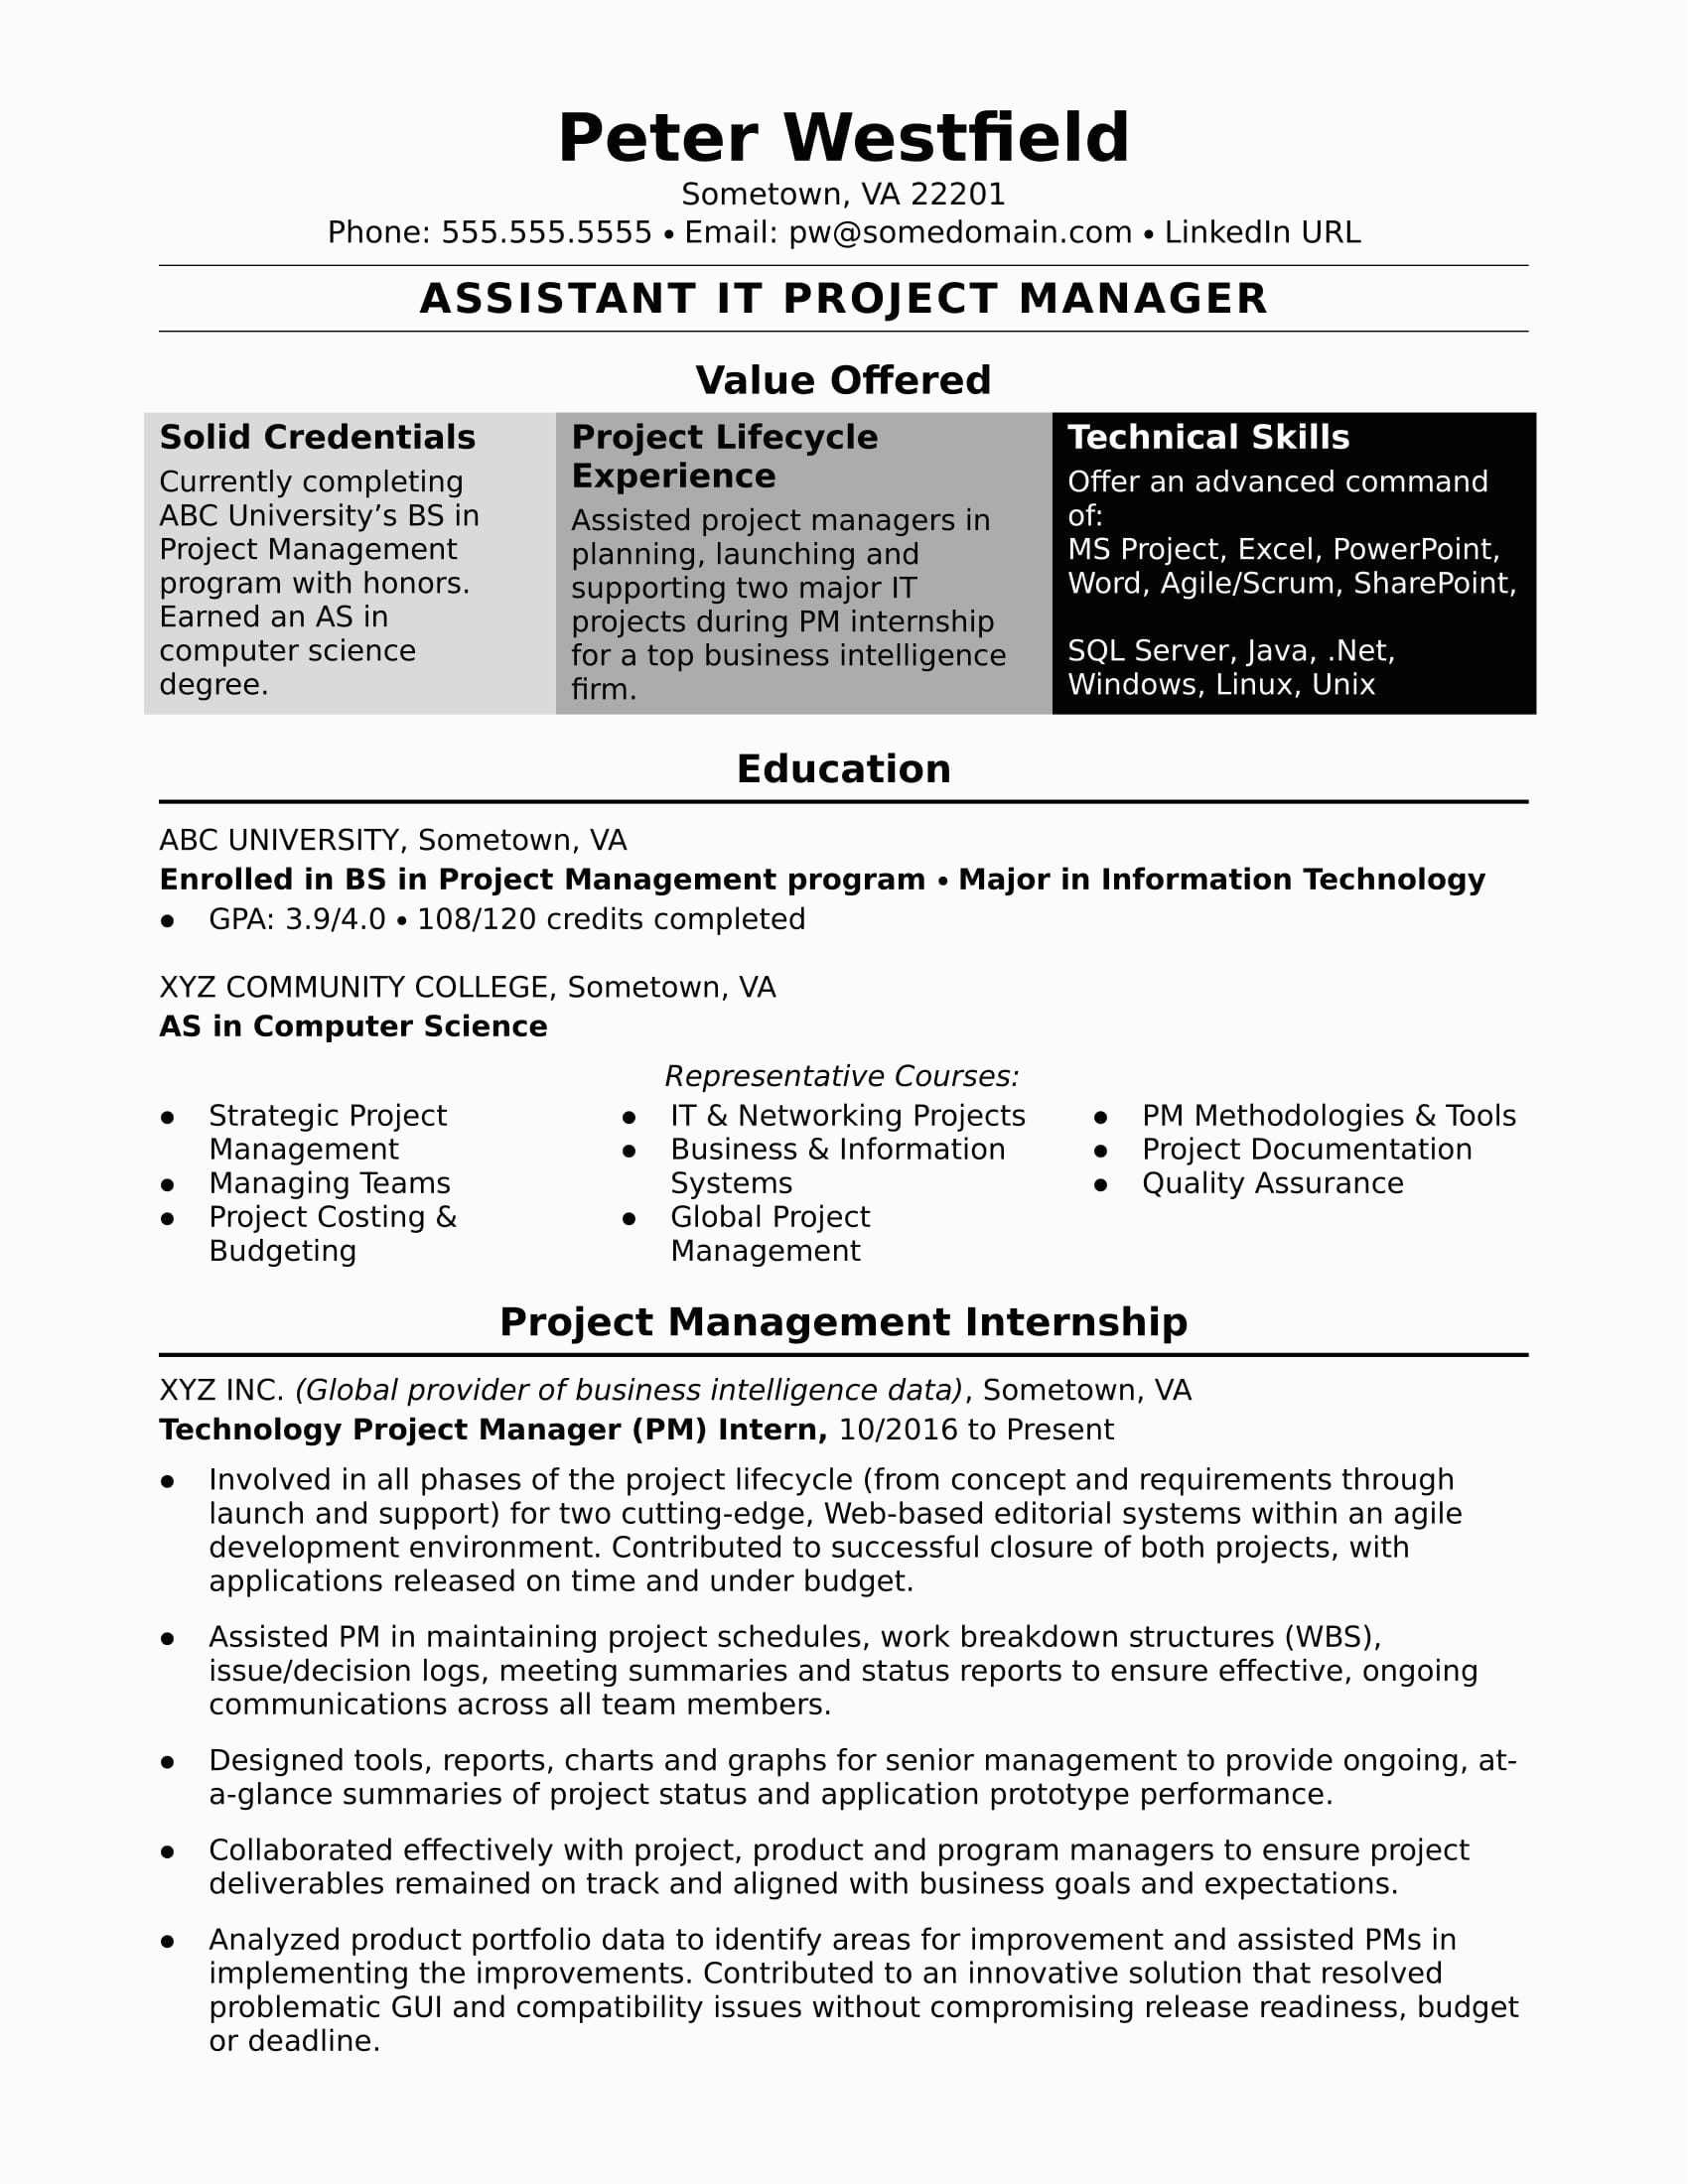 Sample Resume for assistant Project Manager Construction Construction Project assistant Cv March 2021